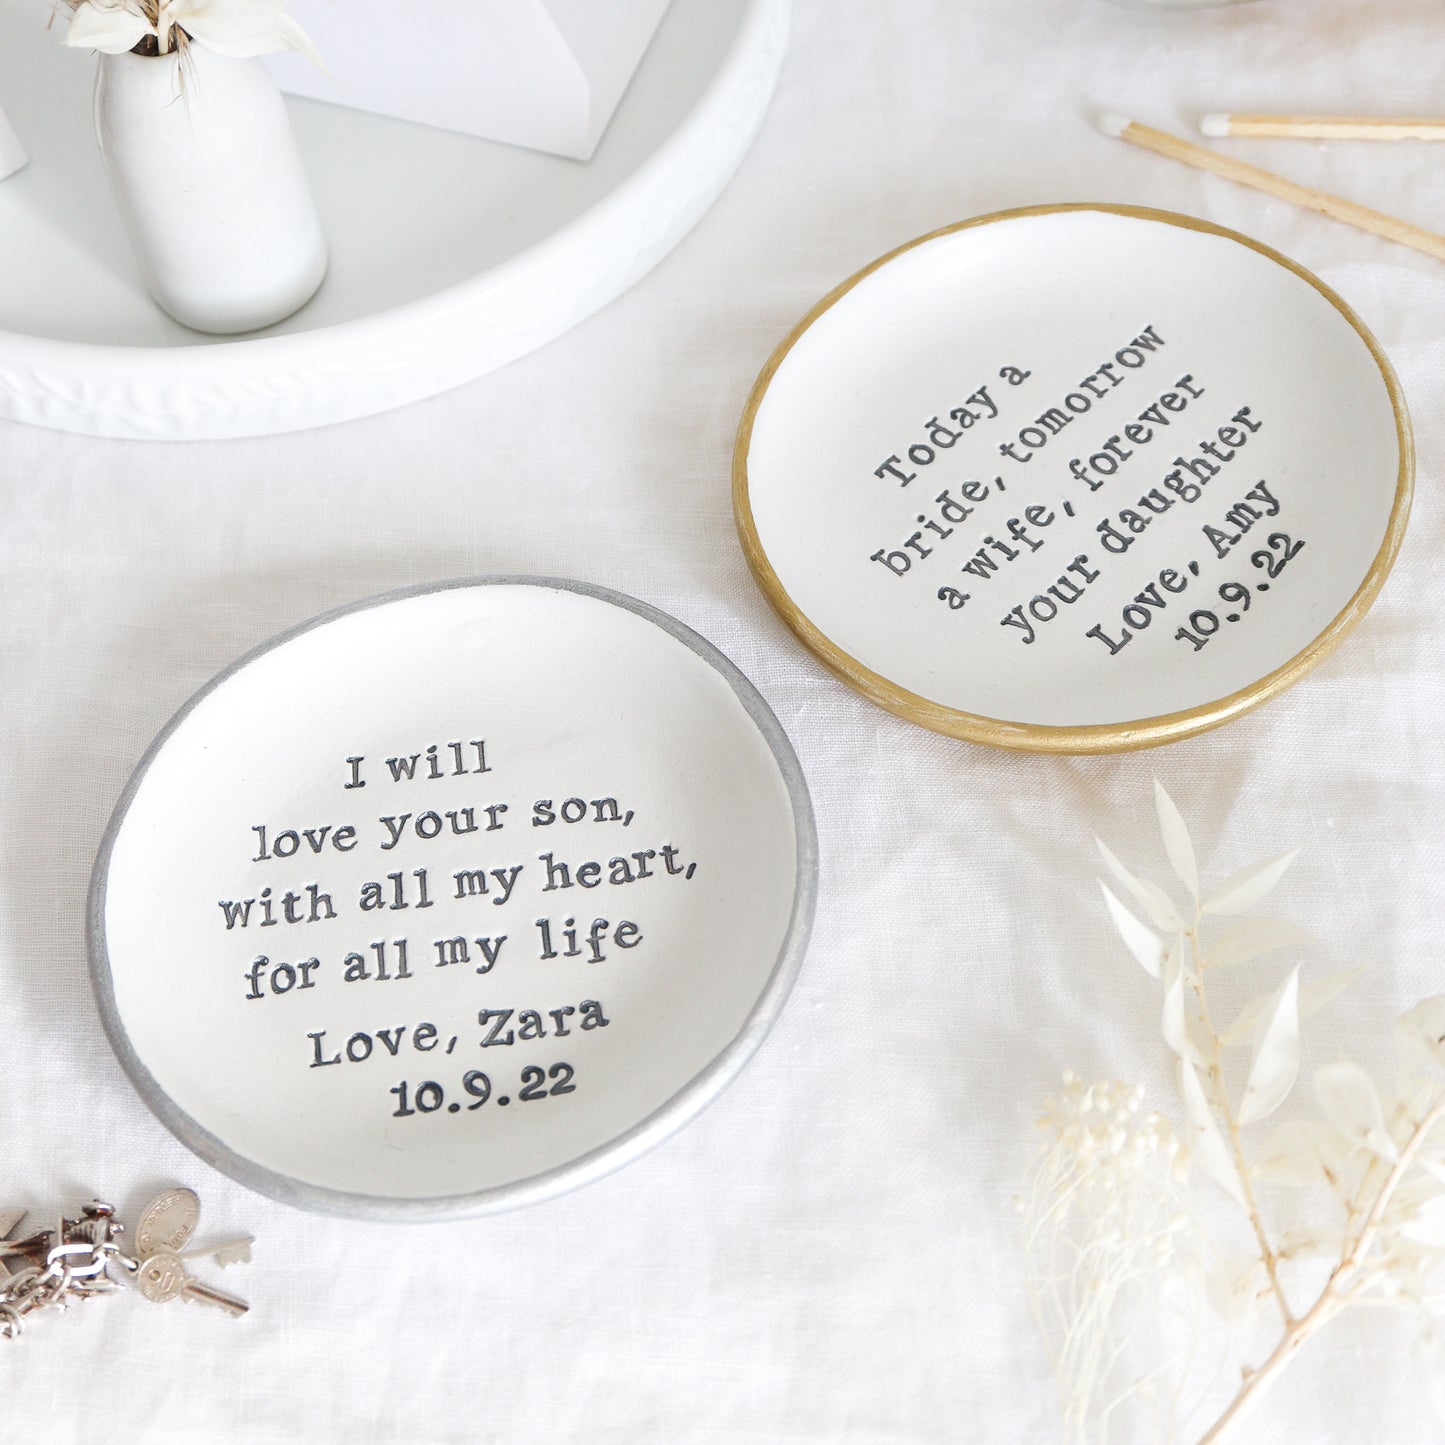 Personalised thank you gifts for the mothers of the wedding